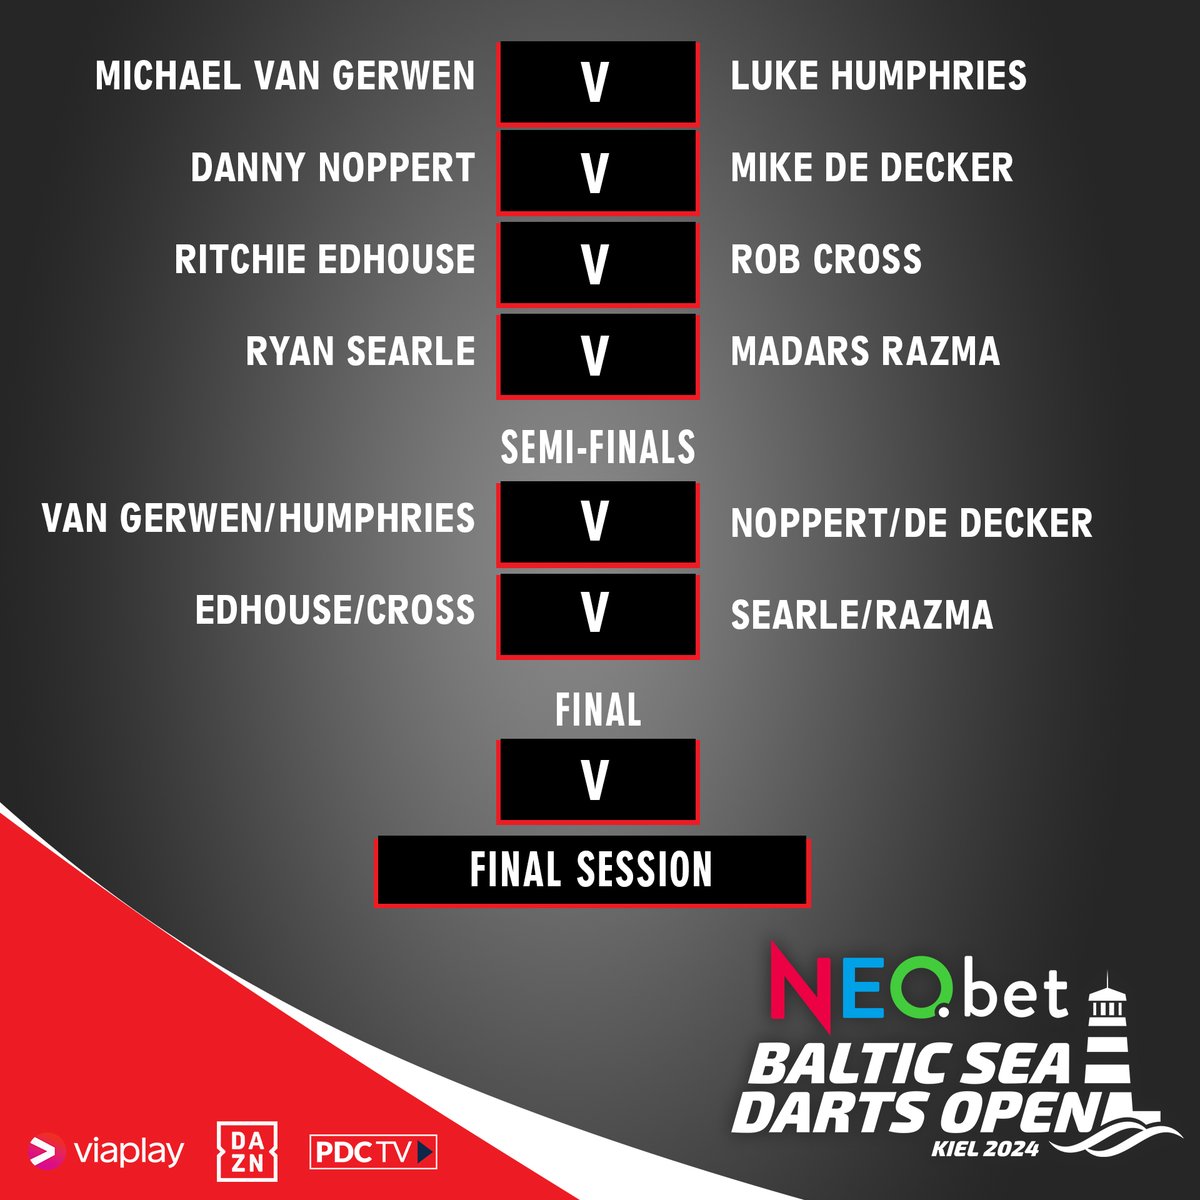 THE FINAL SESSION! Tune in now on PDCTV for the final session of the 2024 Neo.bet Baltic Sea Darts Open in Kiel... Who will be the new name on the trophy? 📺 bit.ly/PDCTVLive